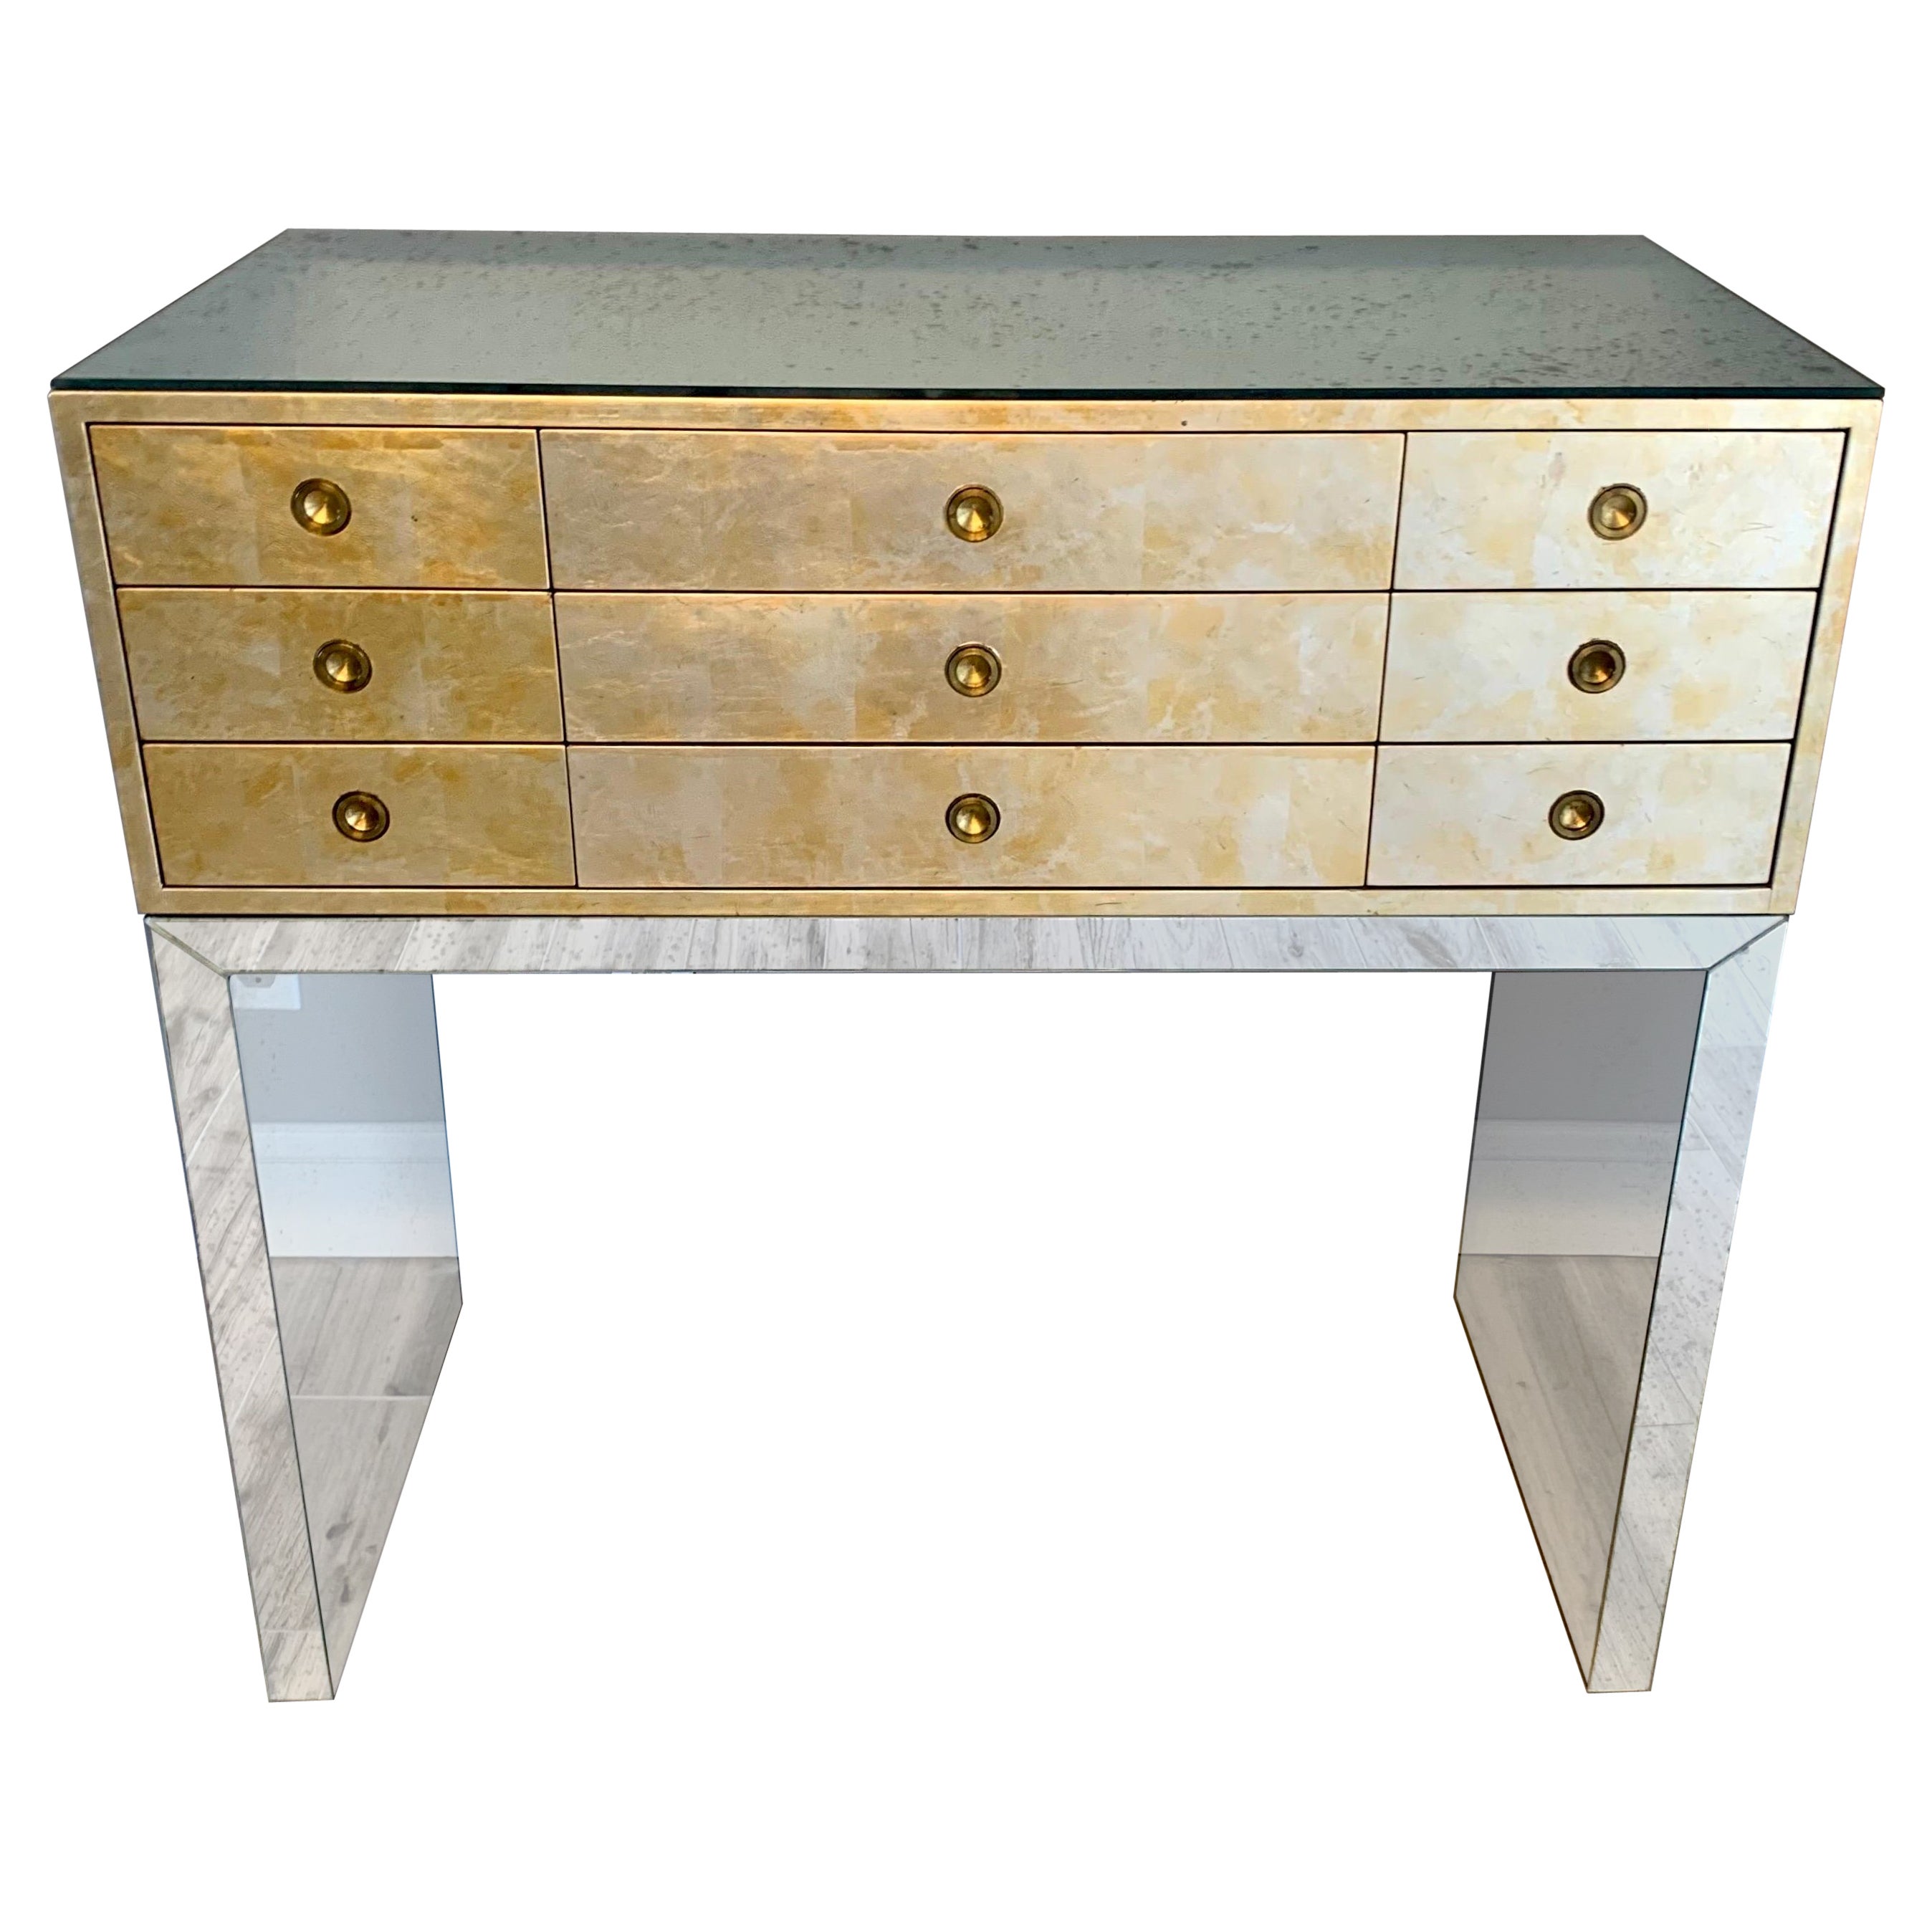 Mid Century Kittinger Gold Leaf Chest of Drawers on Antiqued Mirror Base, 1950s For Sale